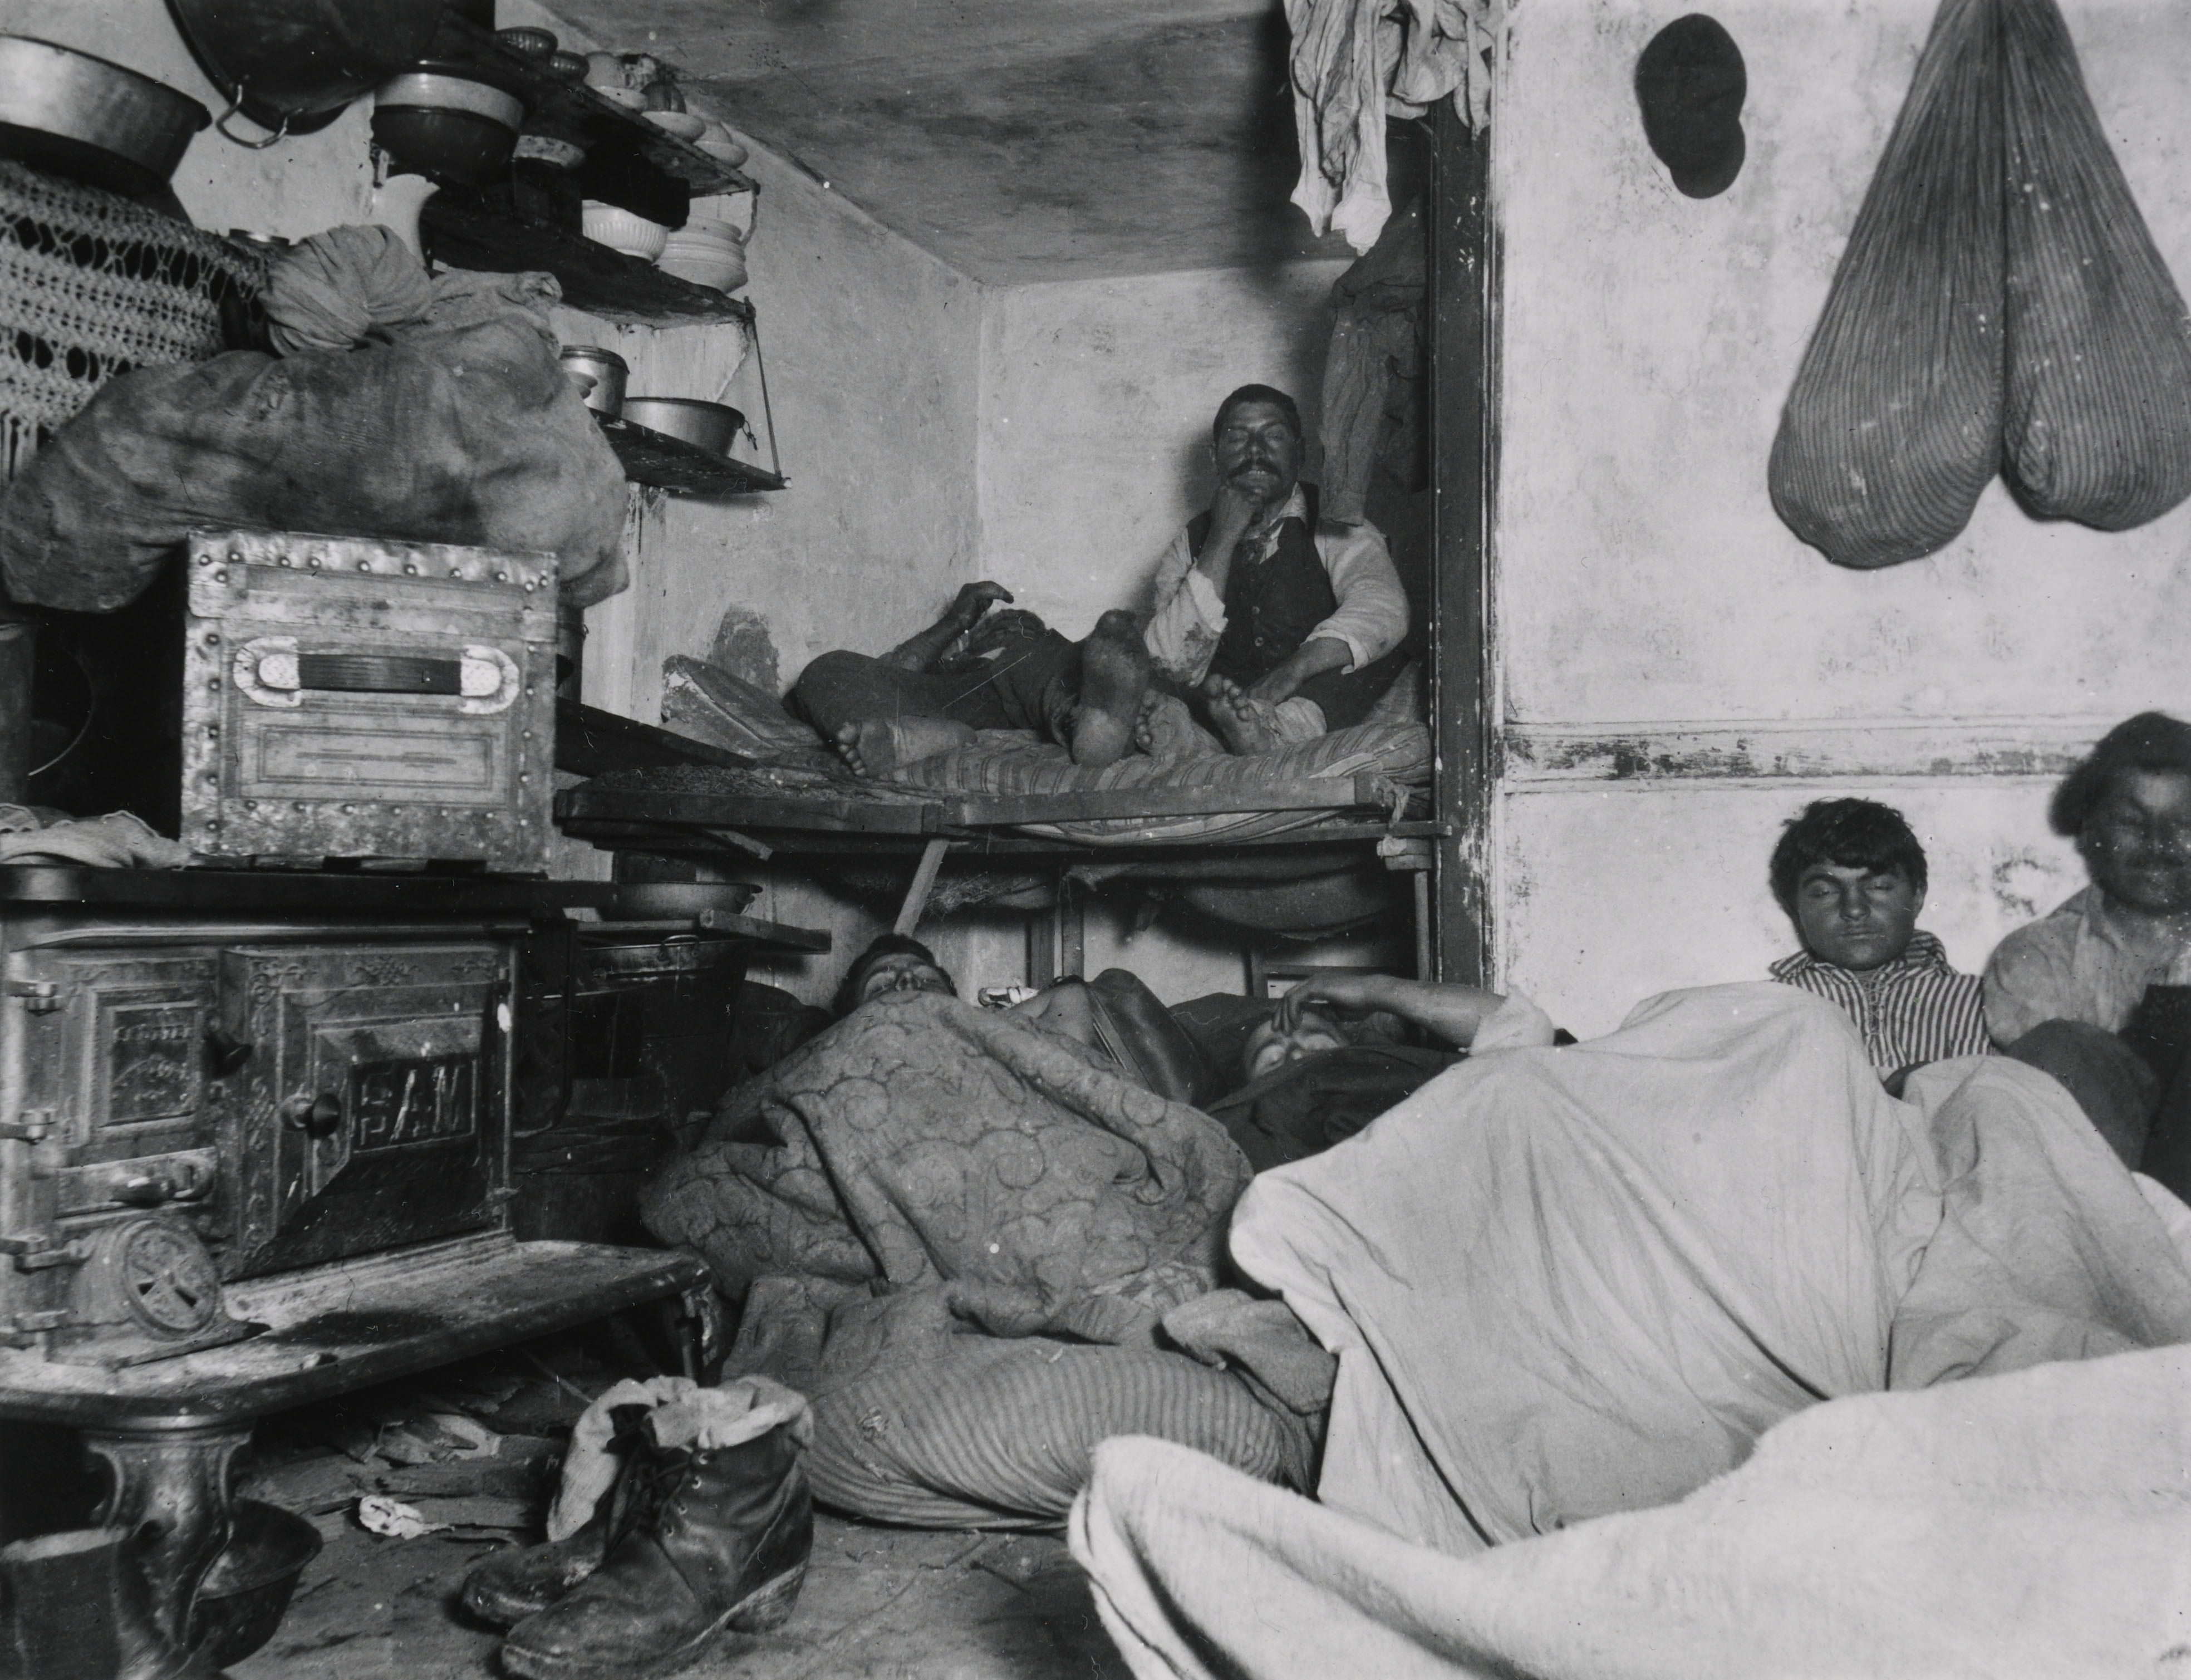 Photograph by Jacob Riis for How the Other Half Lives: ‘Lodgers in Bayard Street Tenement, Five Cents a Spot.’ Image: Wikimedia Commons